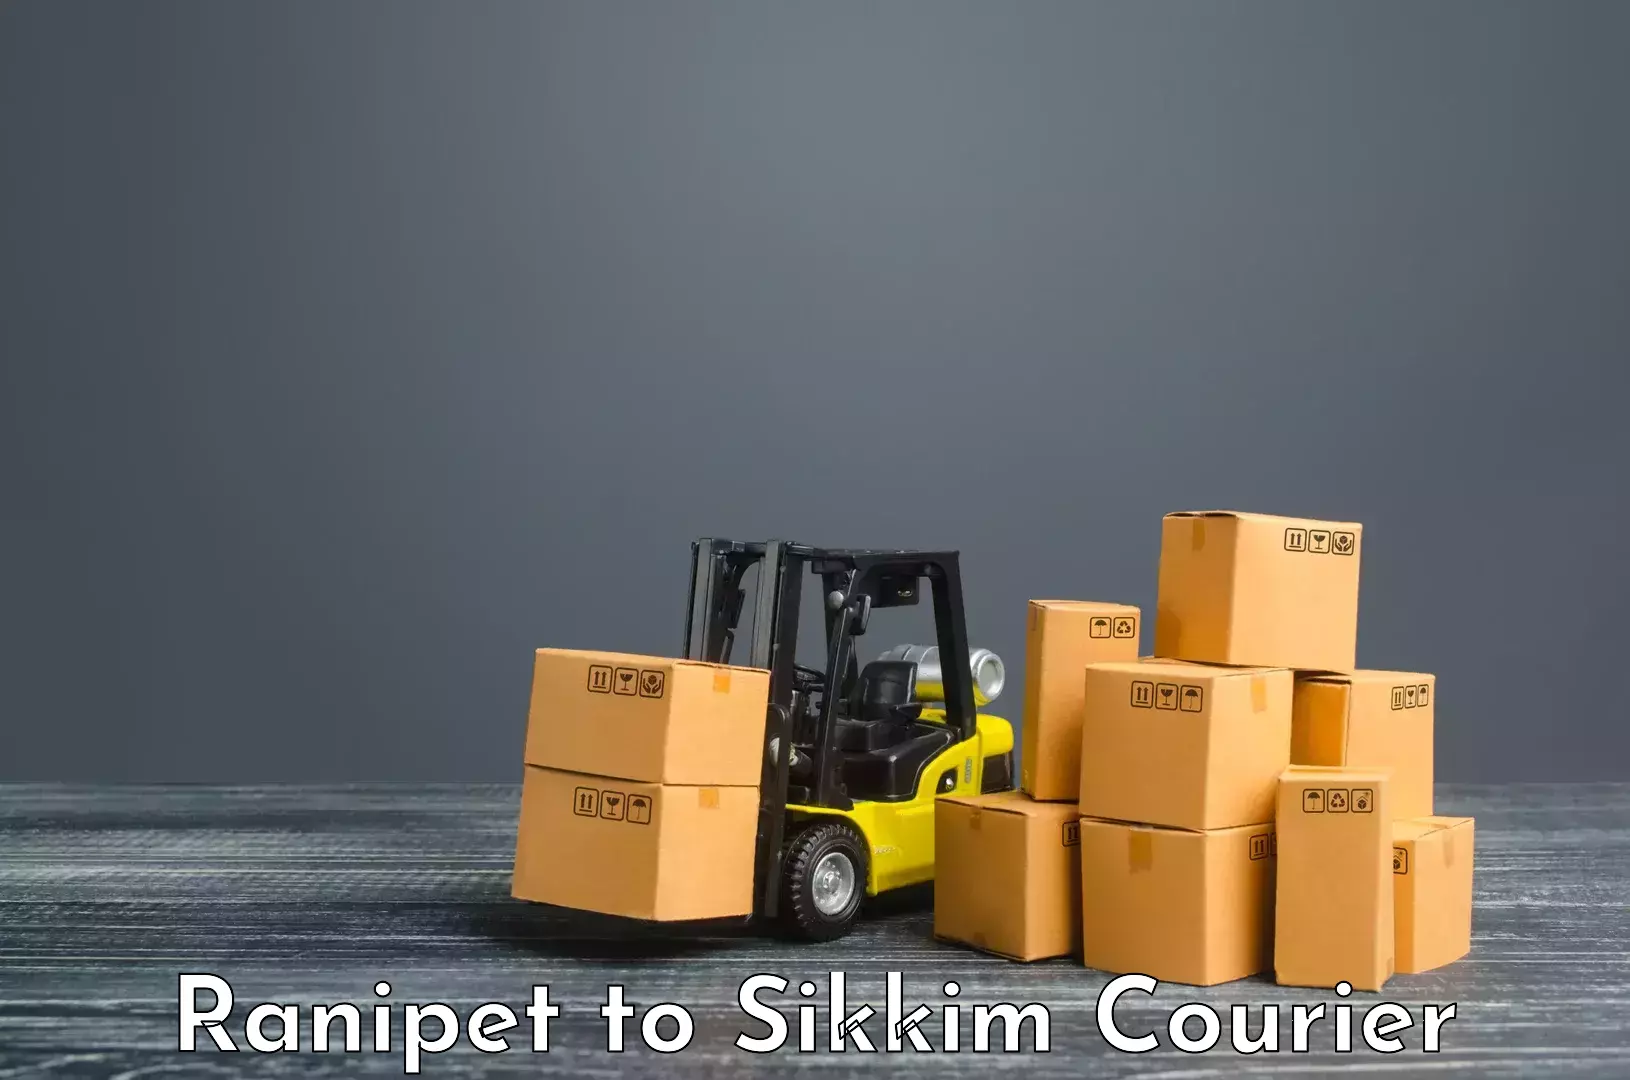 Advanced shipping network Ranipet to Sikkim